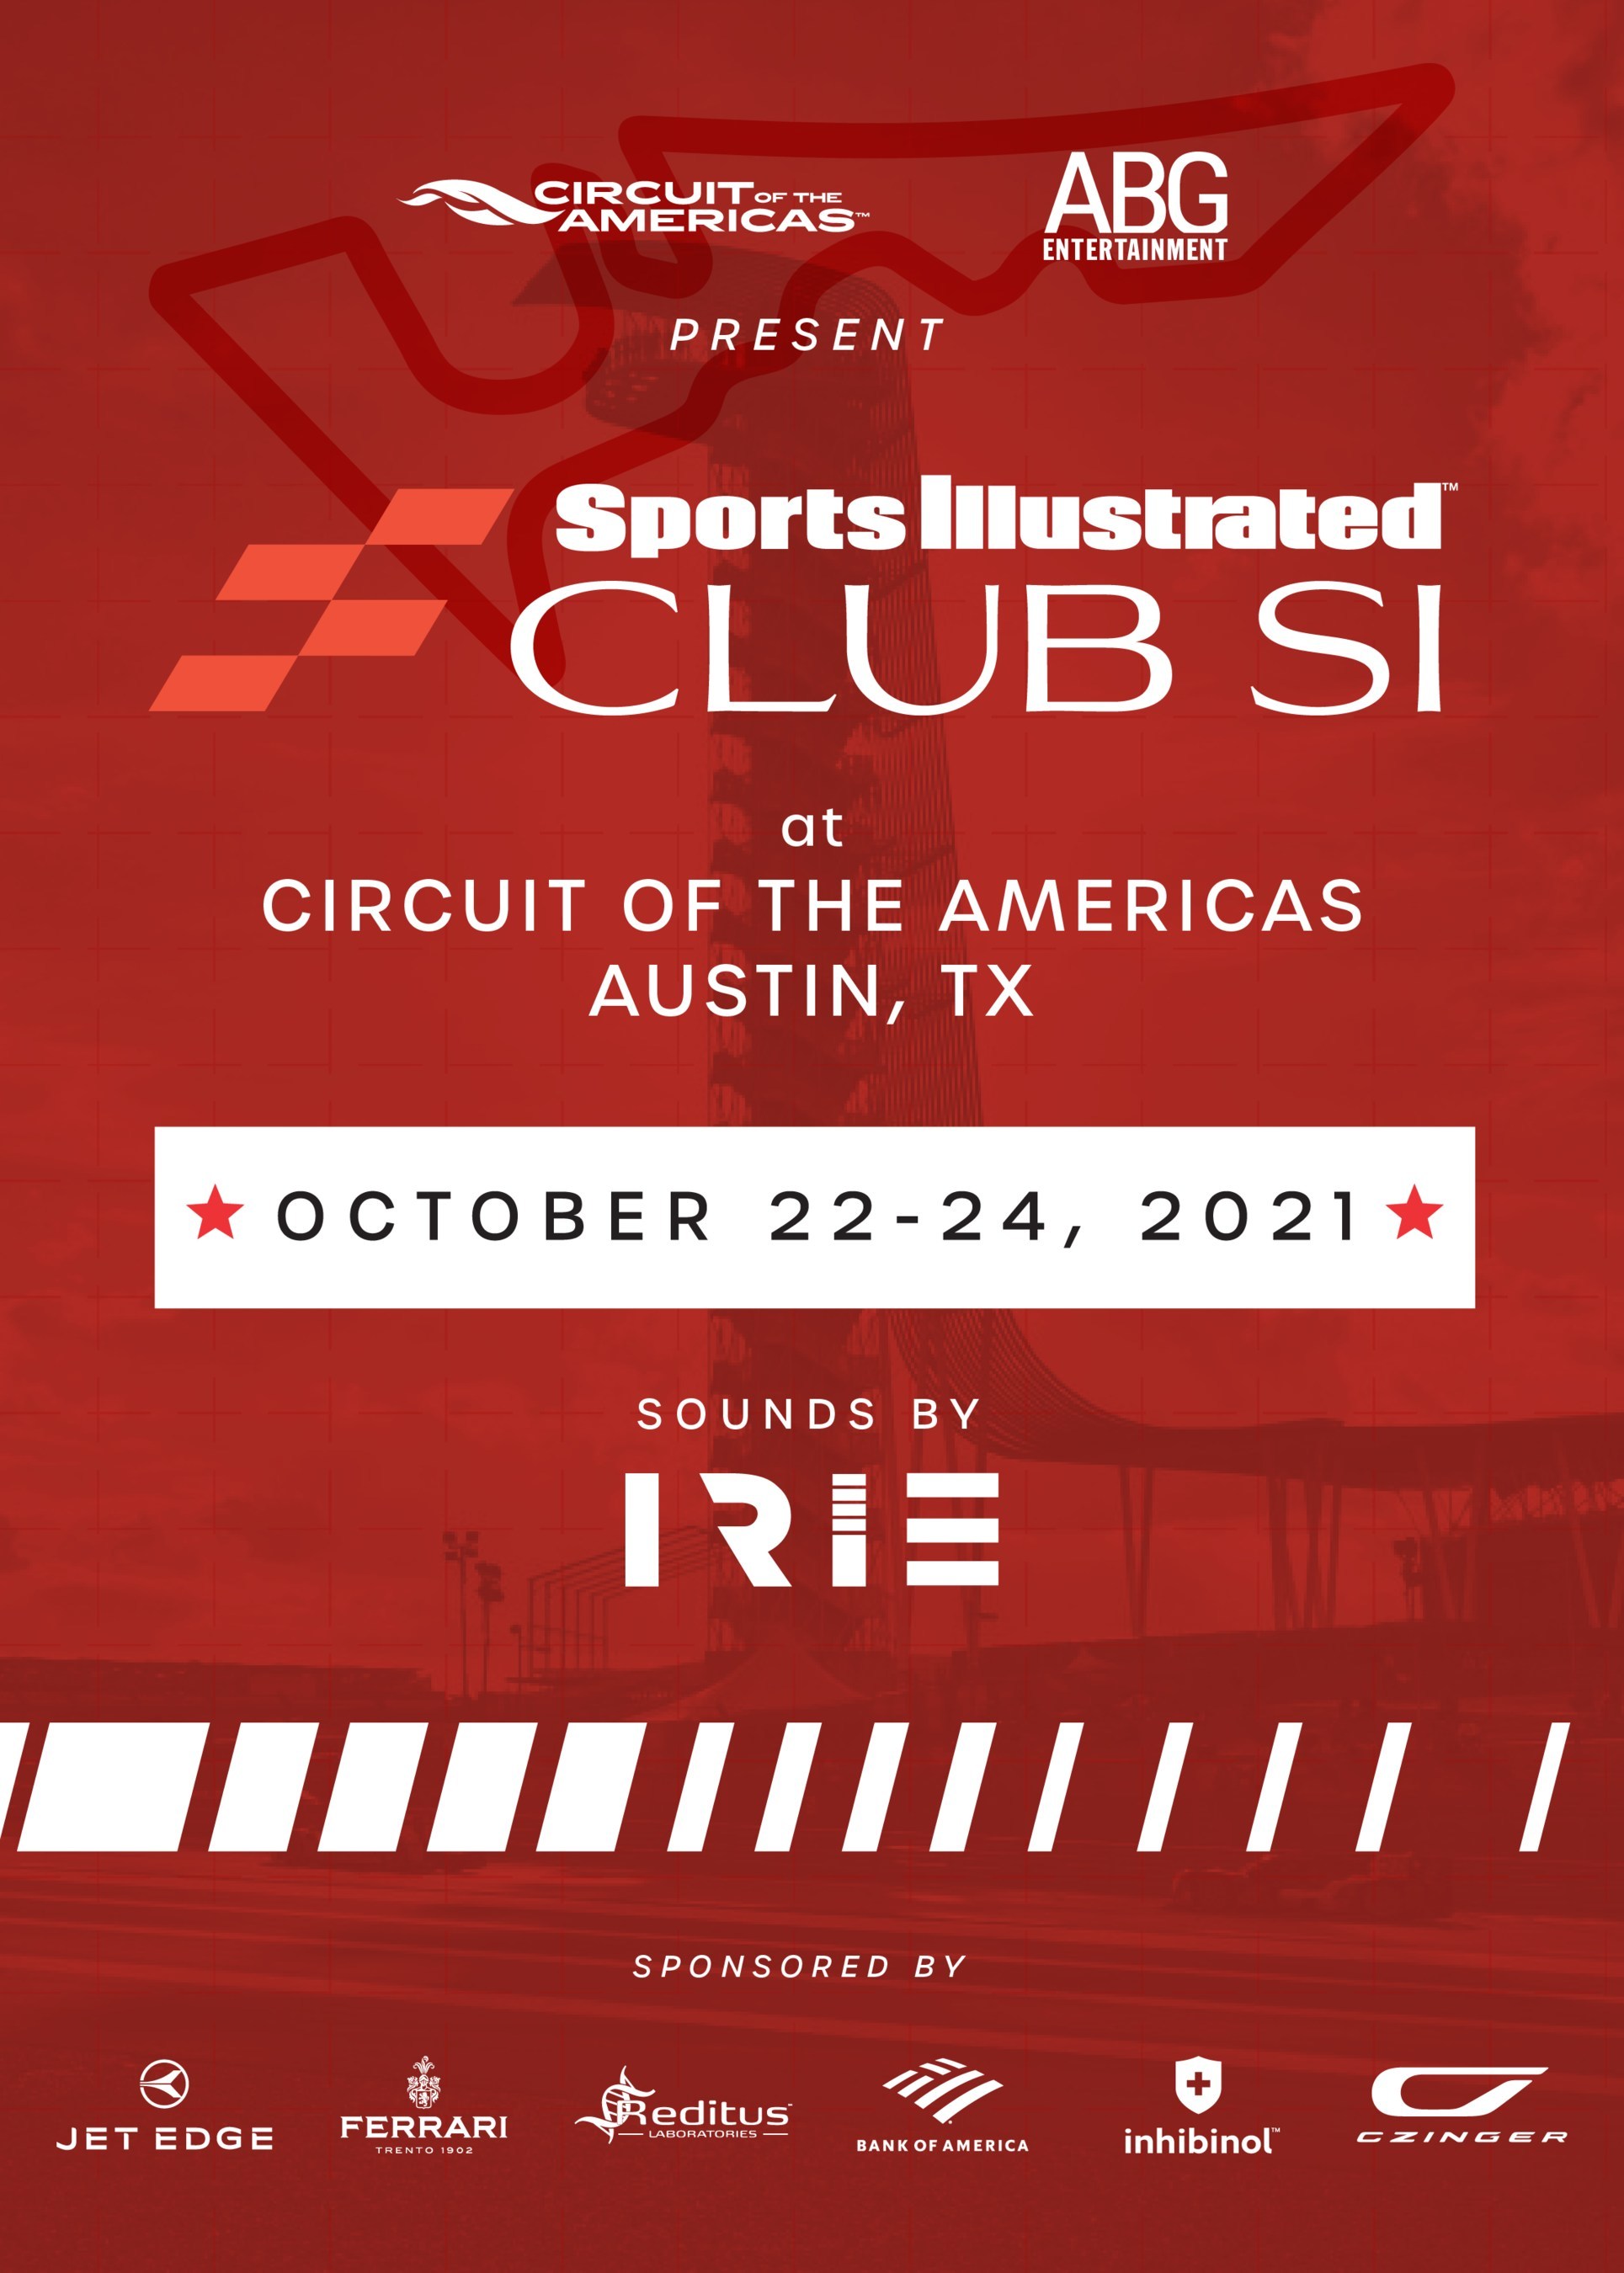 Austin's Big Race Weekend Shifts Into High Gear With Club SI